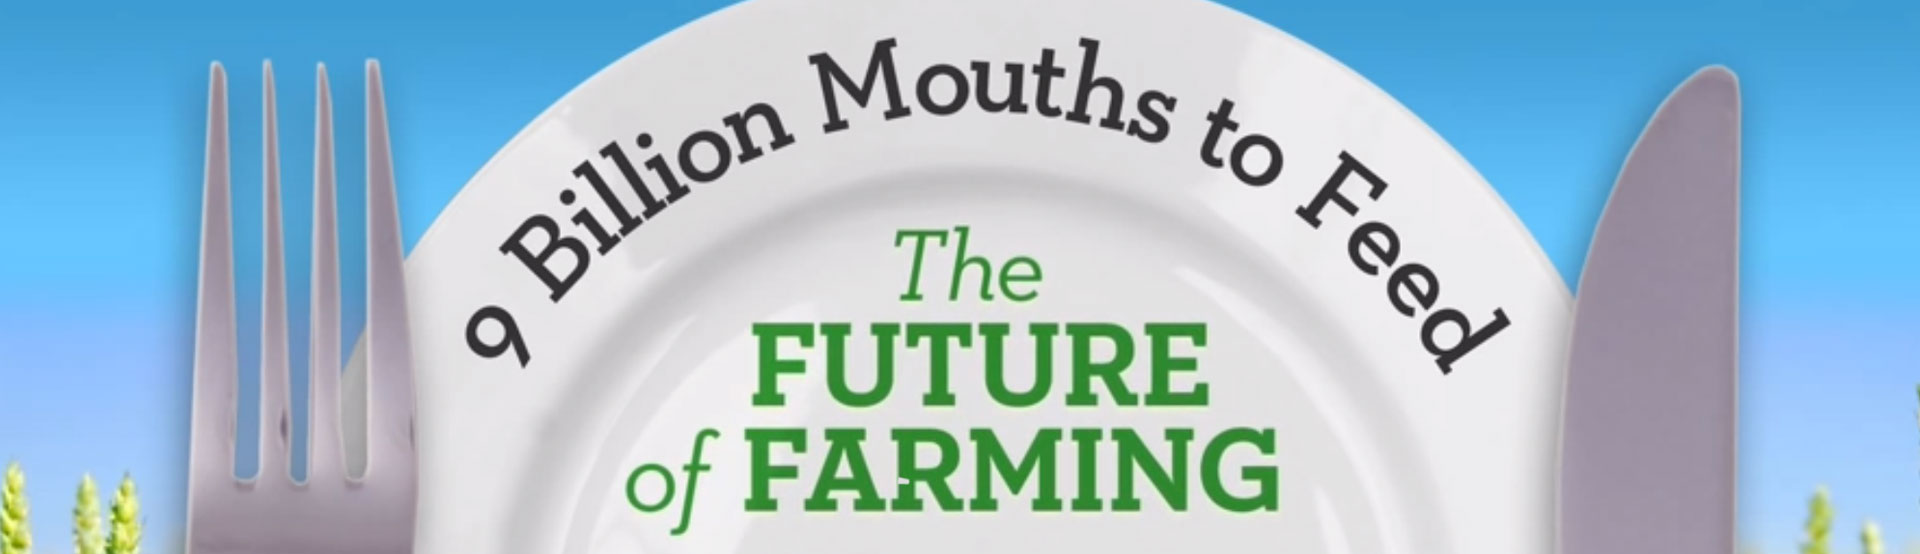 9 Billion Mouths to Feed: The Future of Farming